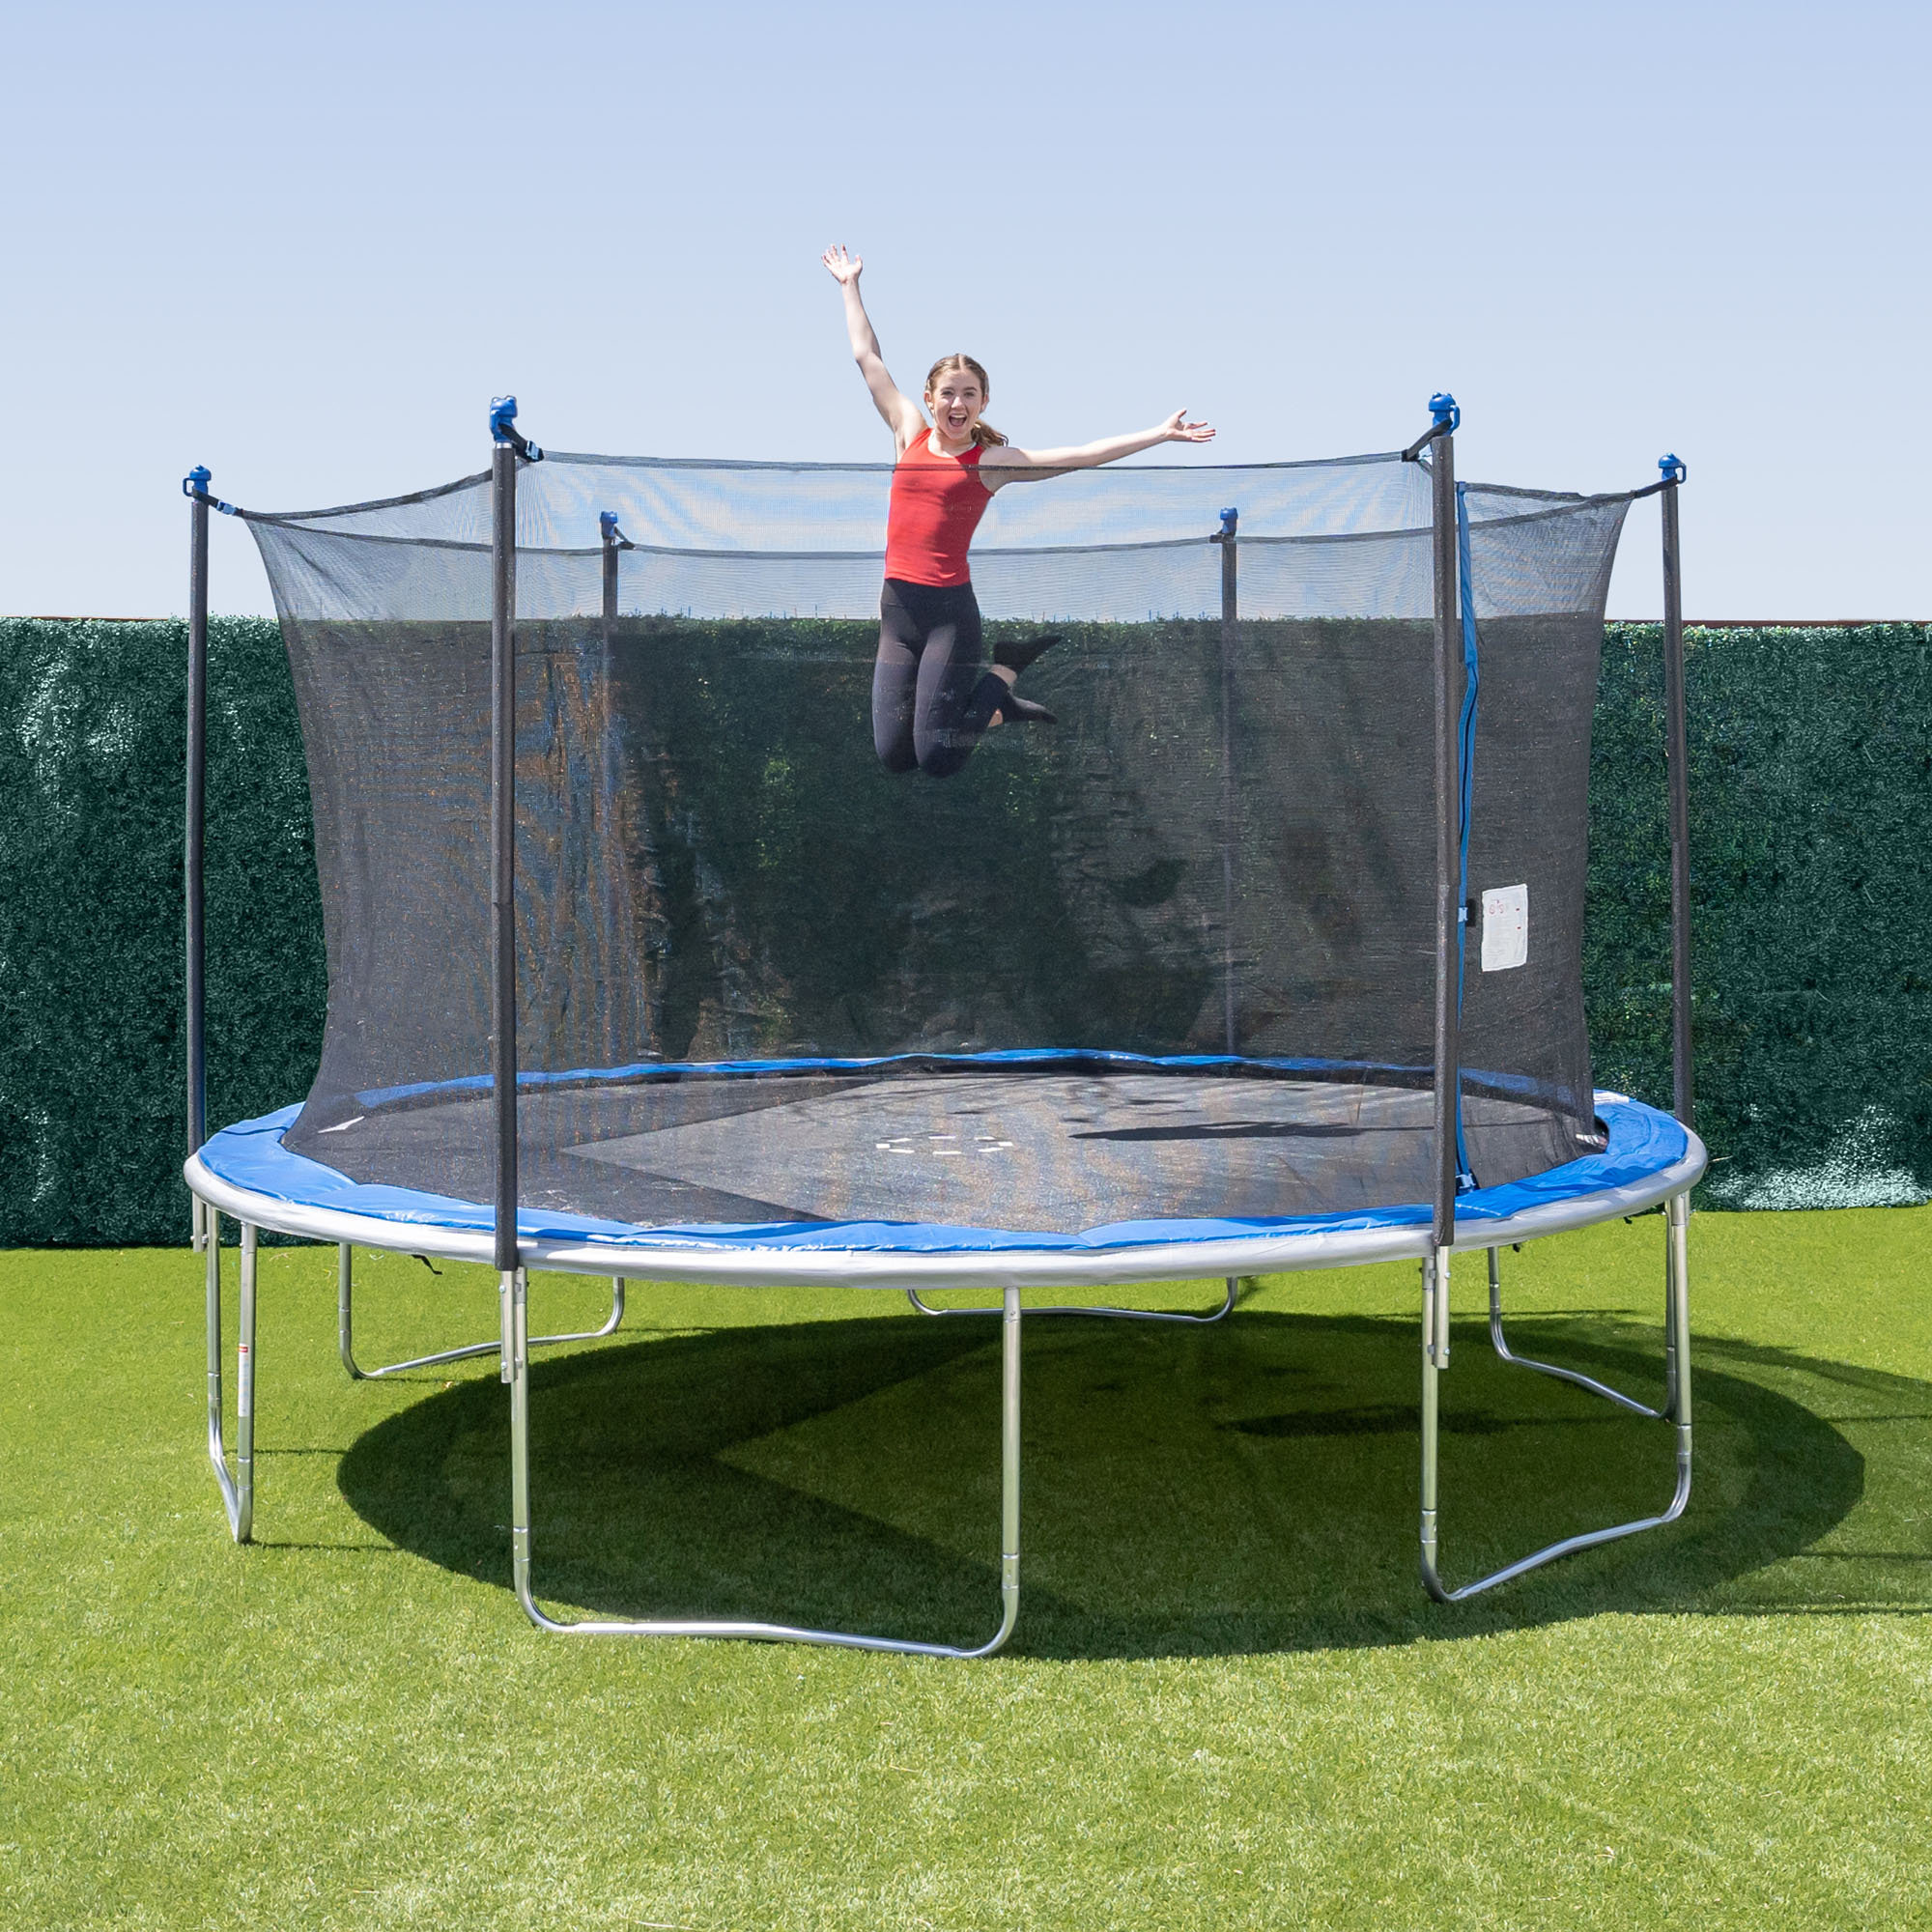 TruJump 14' Round Trampoline with Safety Enclosure